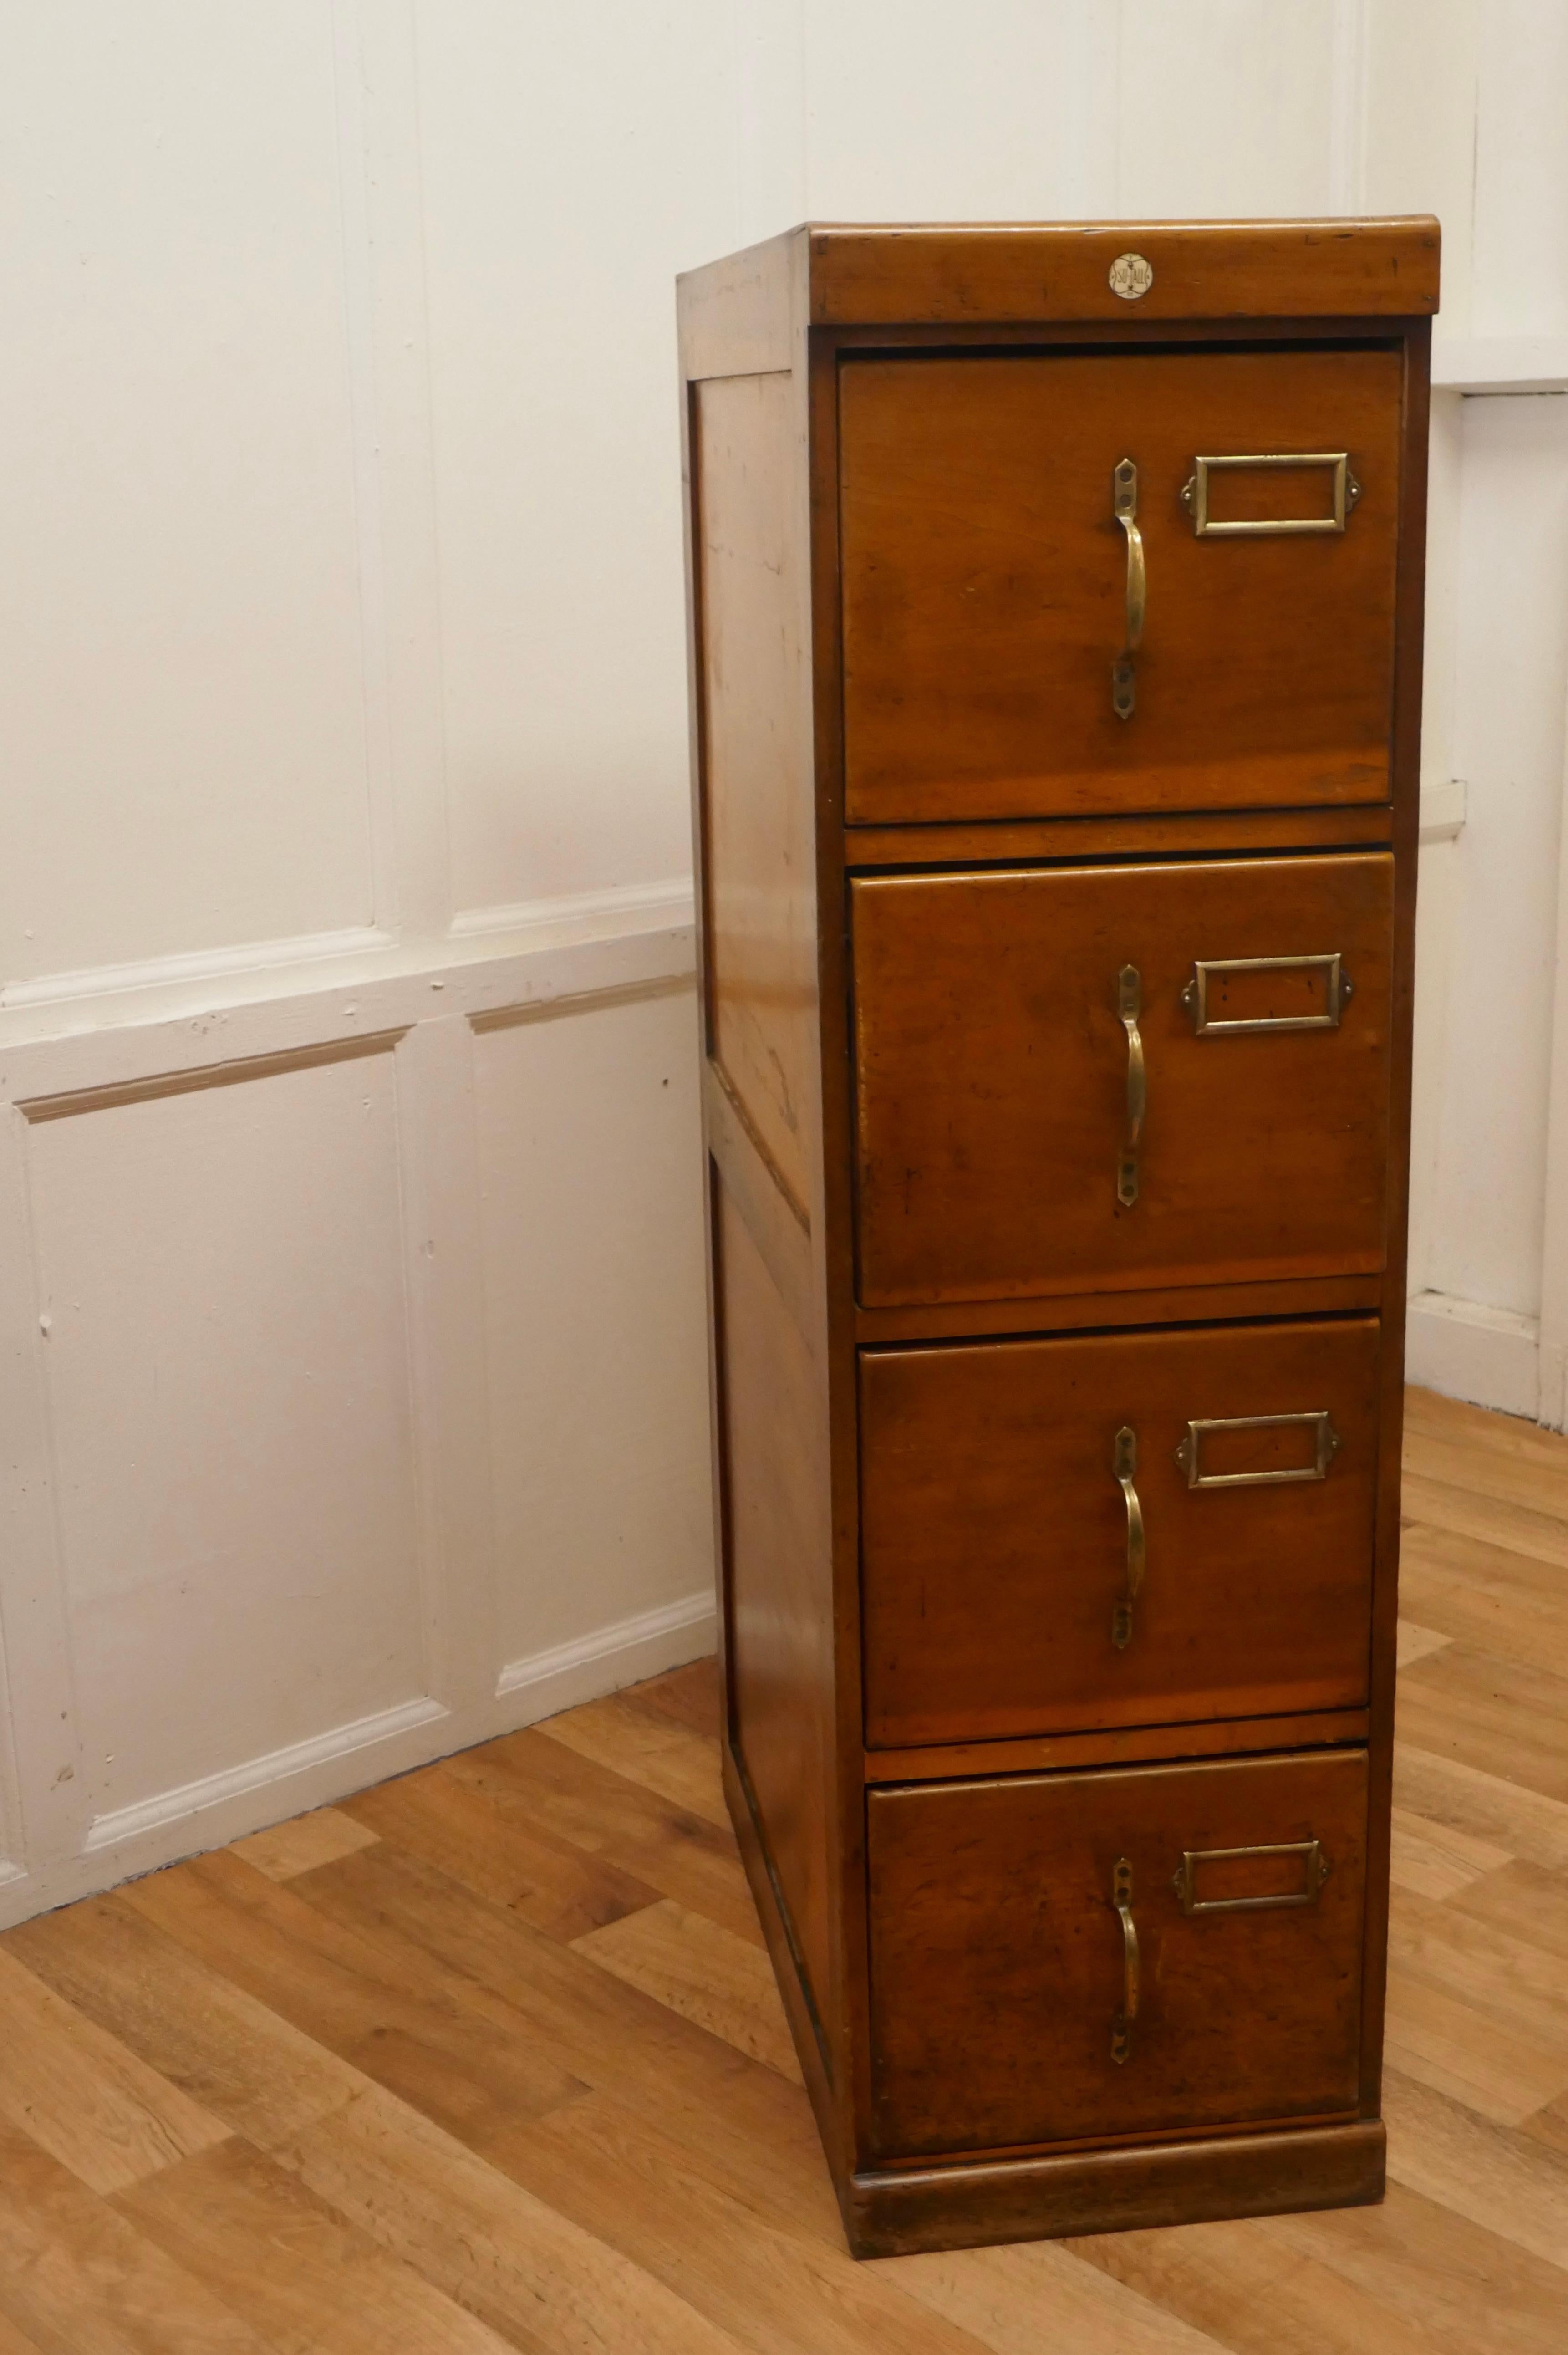 Edwardian 4 Drawer Golden Oak Filing Cabinet, by SU-TALL

This is an absolute must for every home office or study, the cabinet has 4 deep and roomy drawers, they all glide smoothly and have brass handles and card holders on the front

The Filing